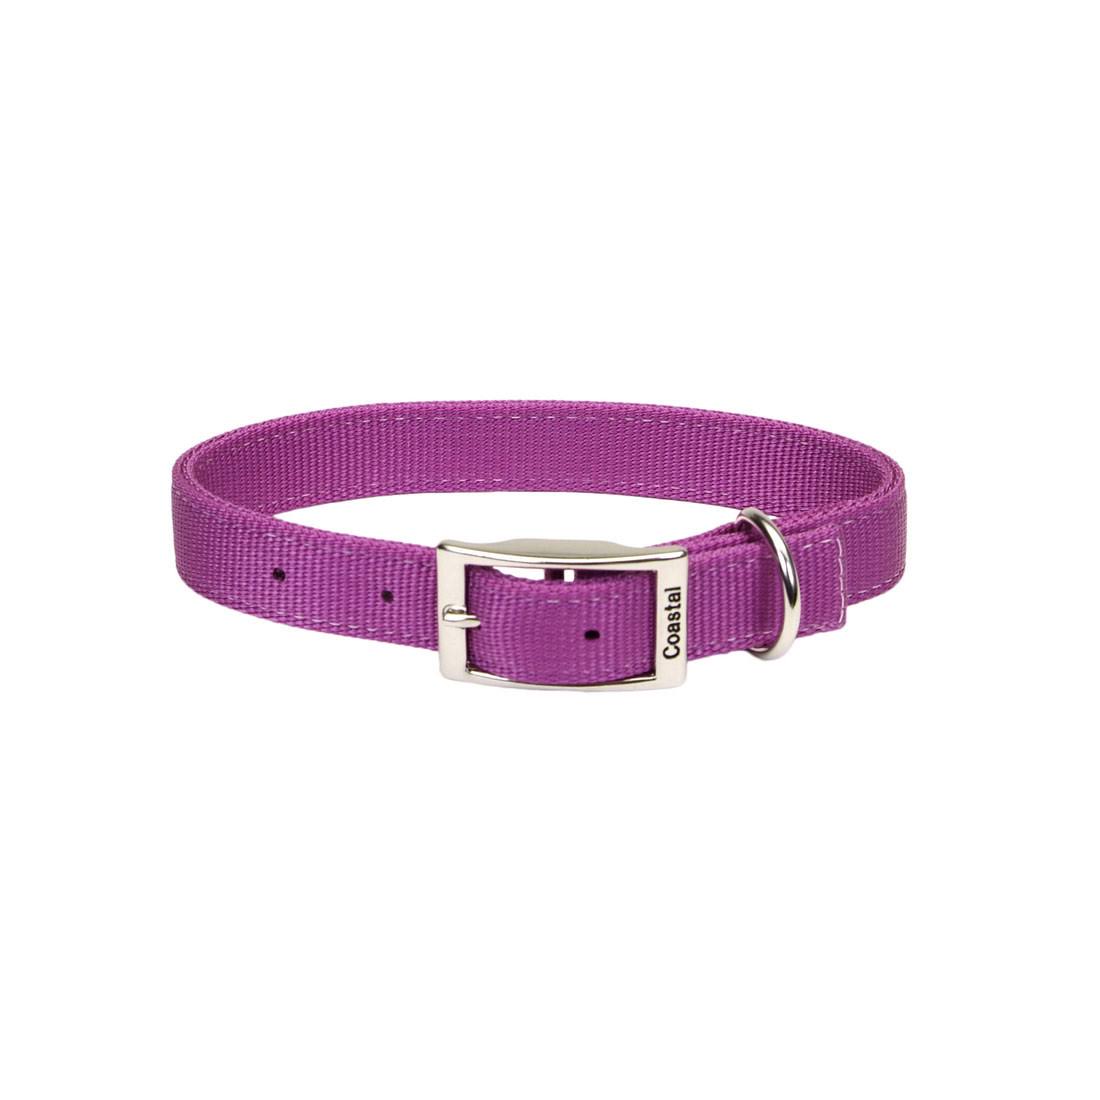 Coastal Pet Products Nylon Double-Ply Dog Collar - Purple, 1in x 22in